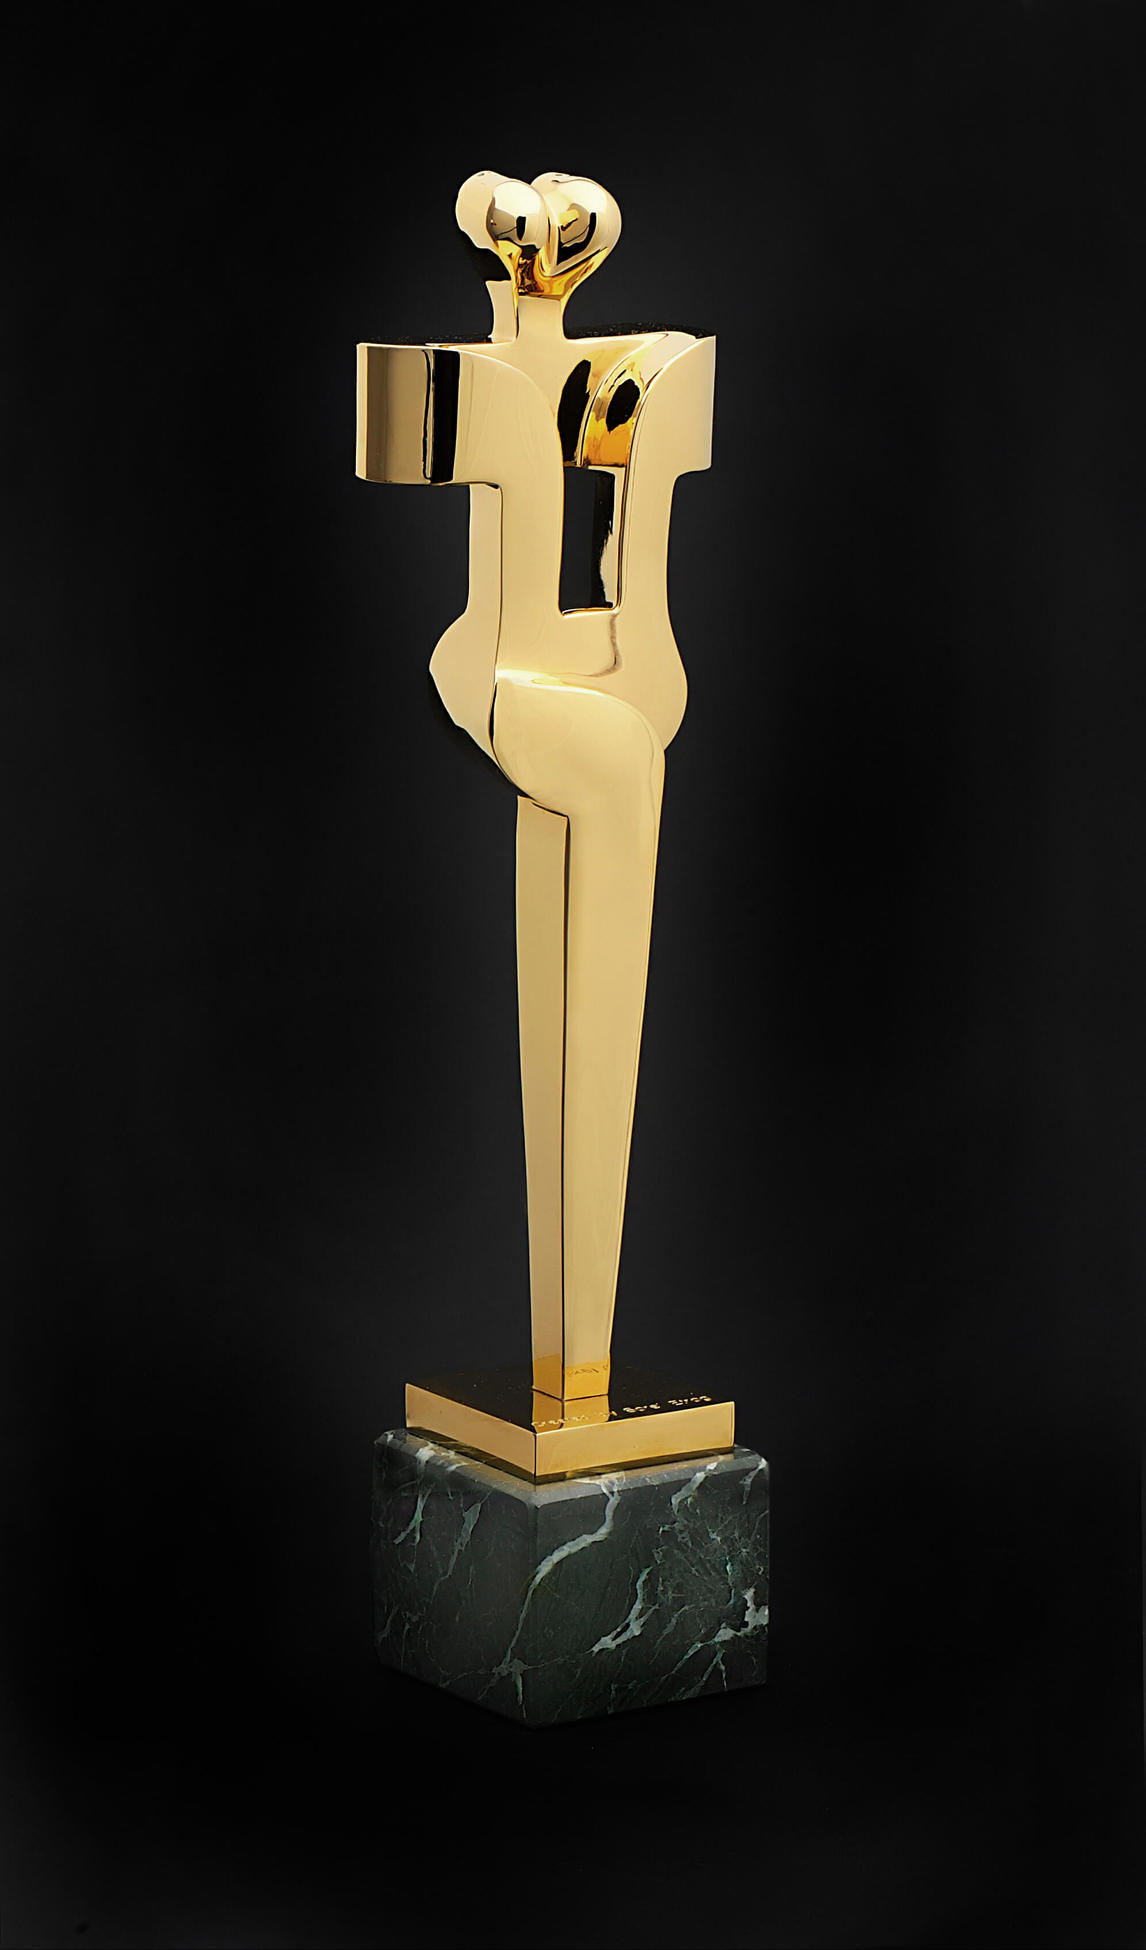 The Canadian Film Award, renamed the Genie in 1980